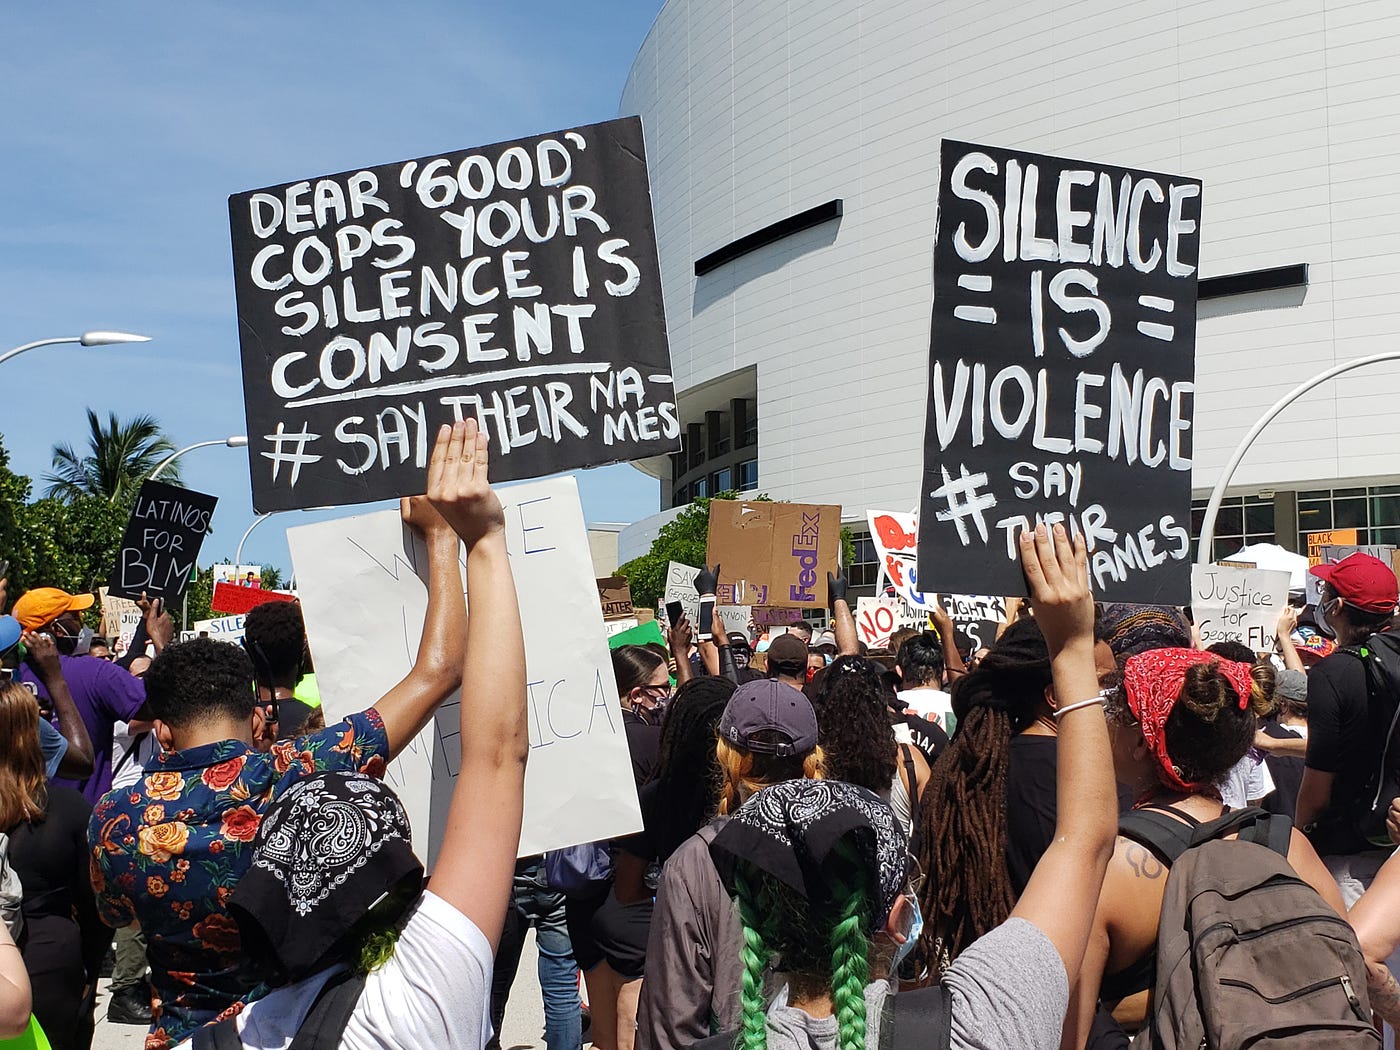 40 Years After the McDuffie Riots, Miami Still Marches Against Police Violence | by Community Justice Project | Community Justice Project Miami | Medium